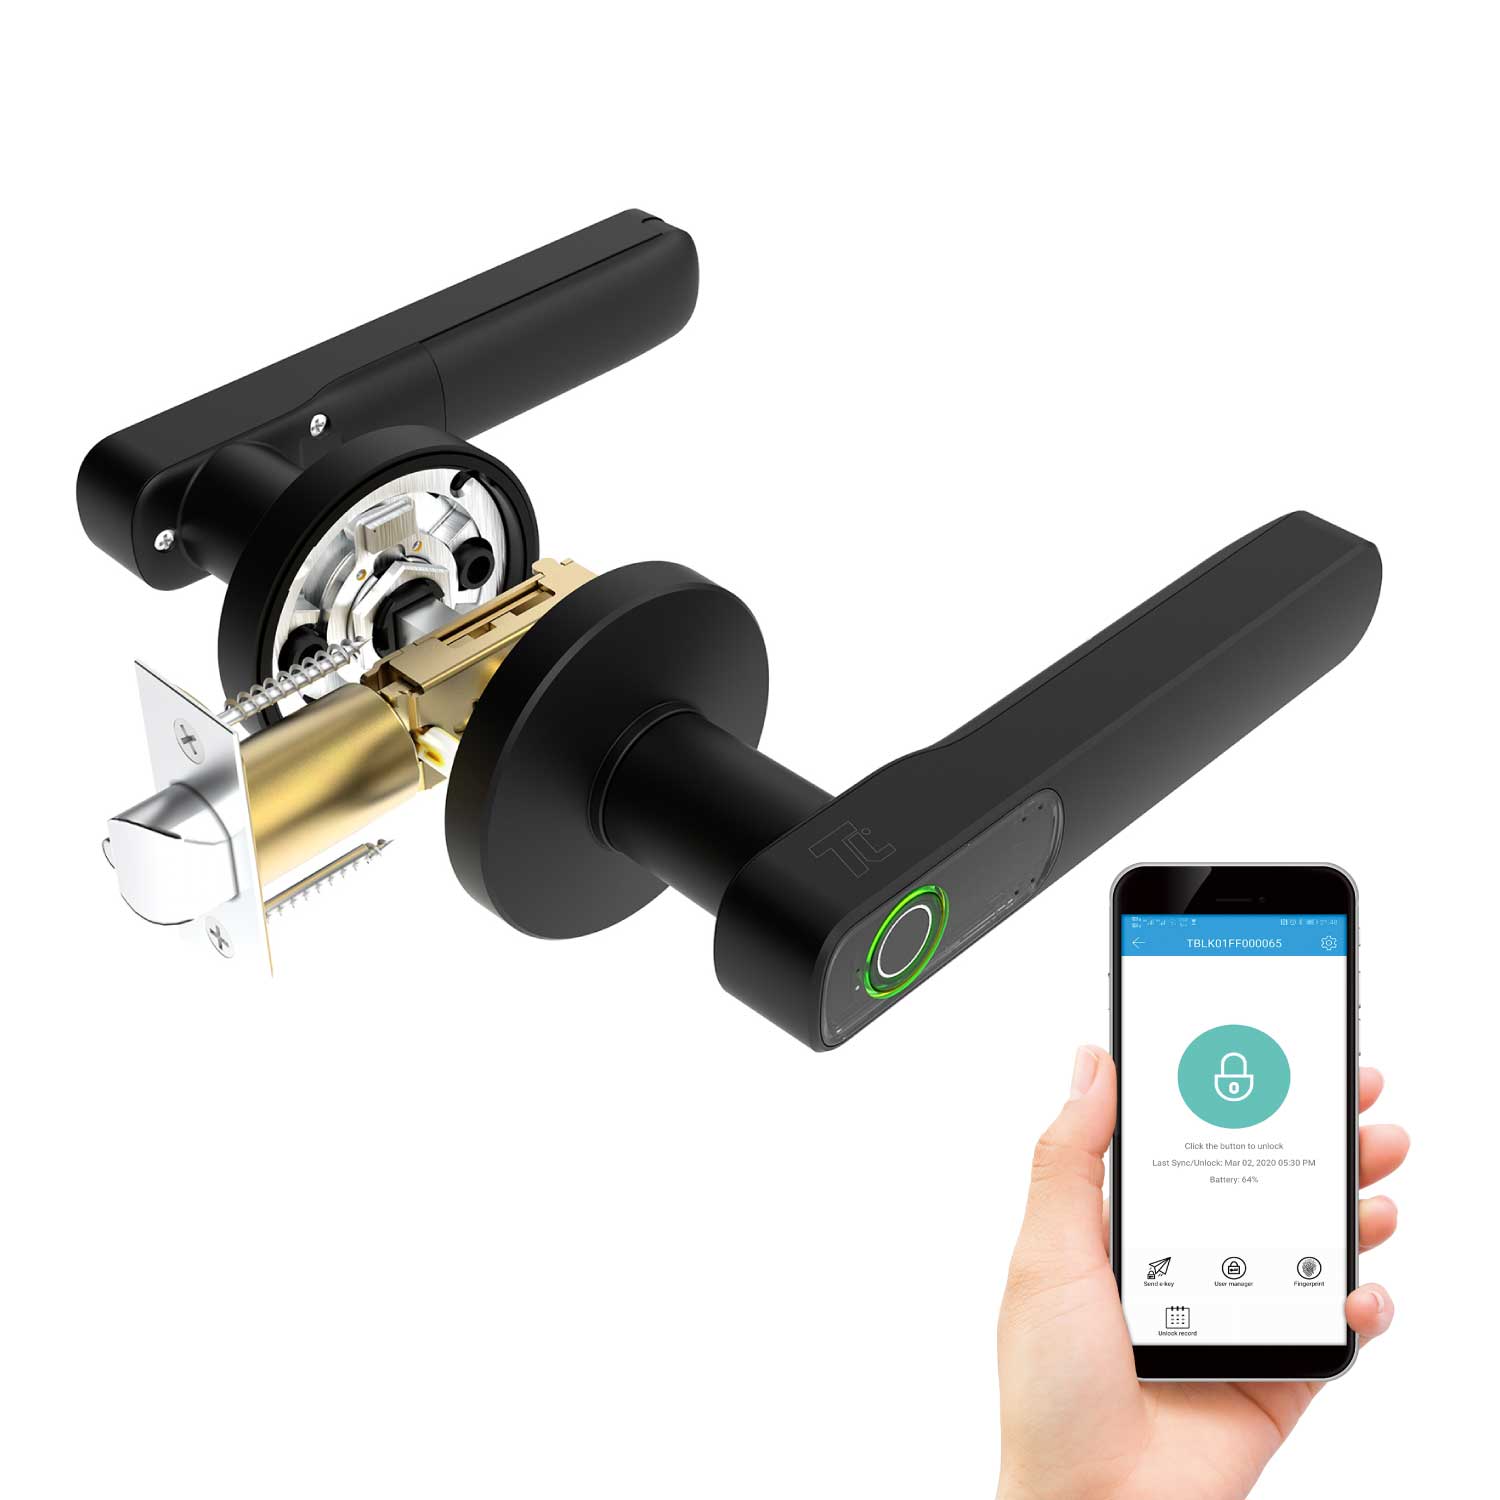 TURBOLOCK TL88 App-Enabled Fingerprint Smart Door Lever Handle Lock One-Touch Security Solution for Home or Office - image 1 of 6